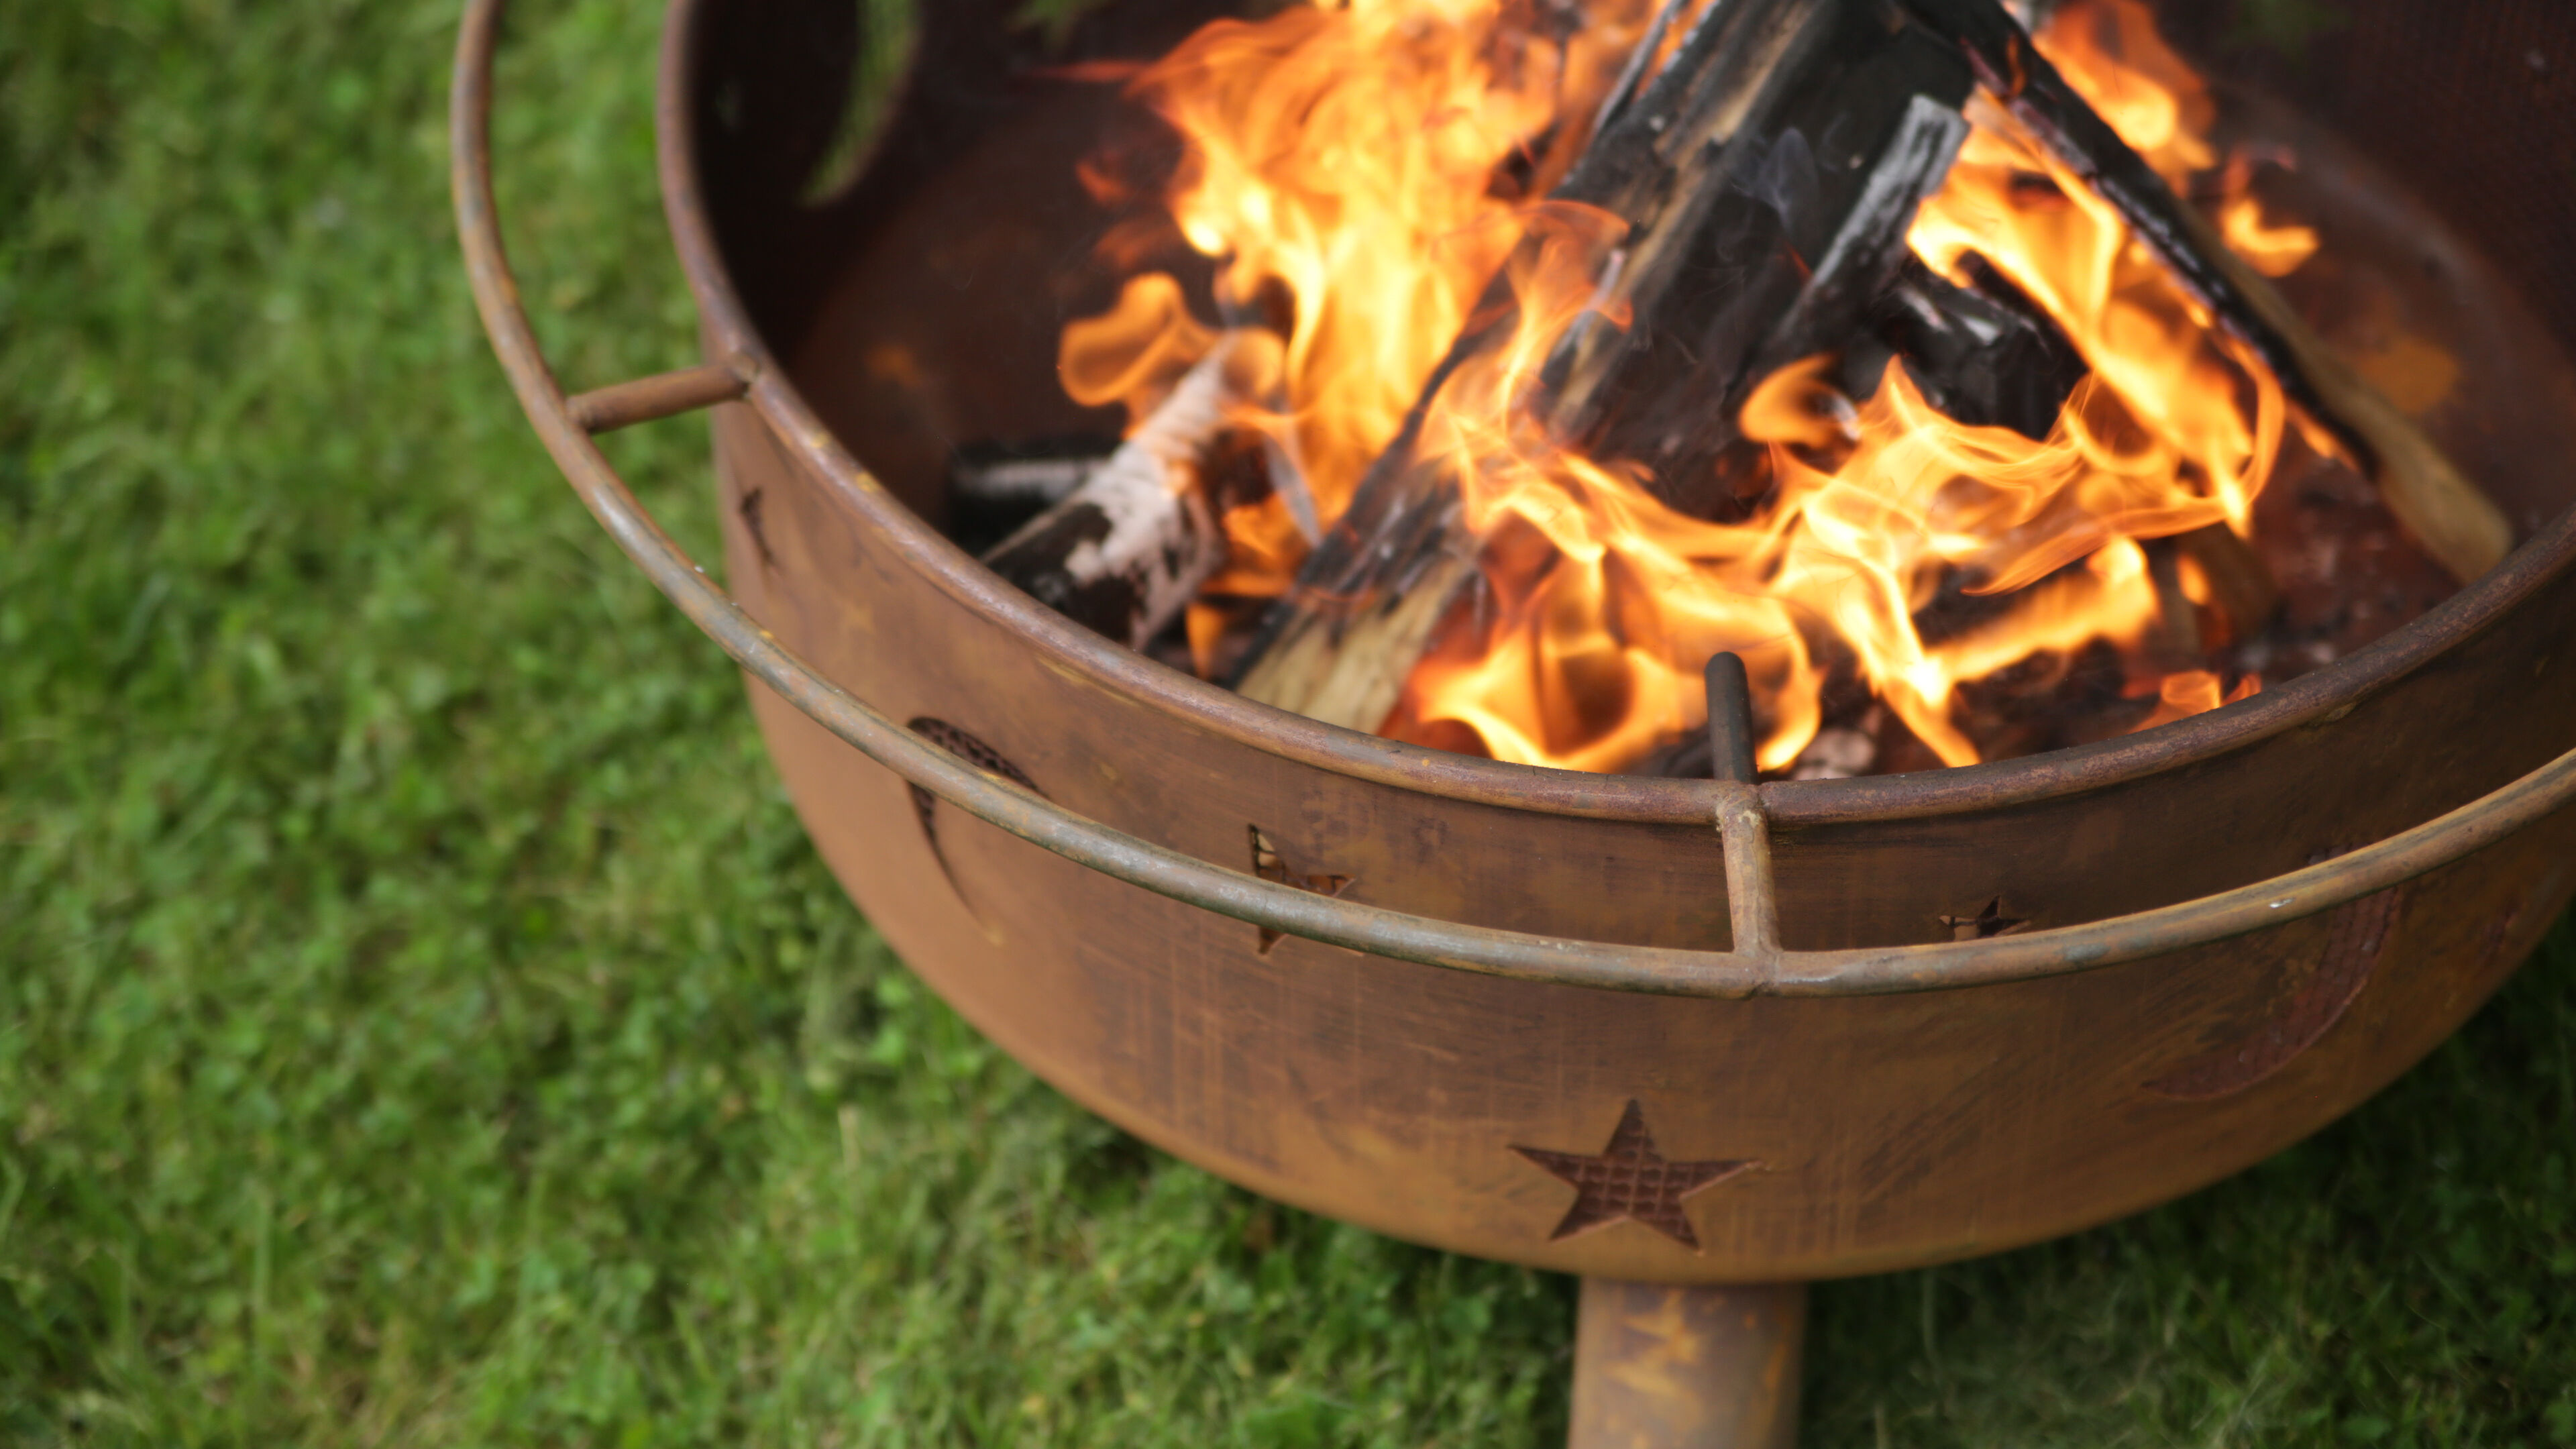 A close-up of a steel wood burning fire pit burning in a backyard.